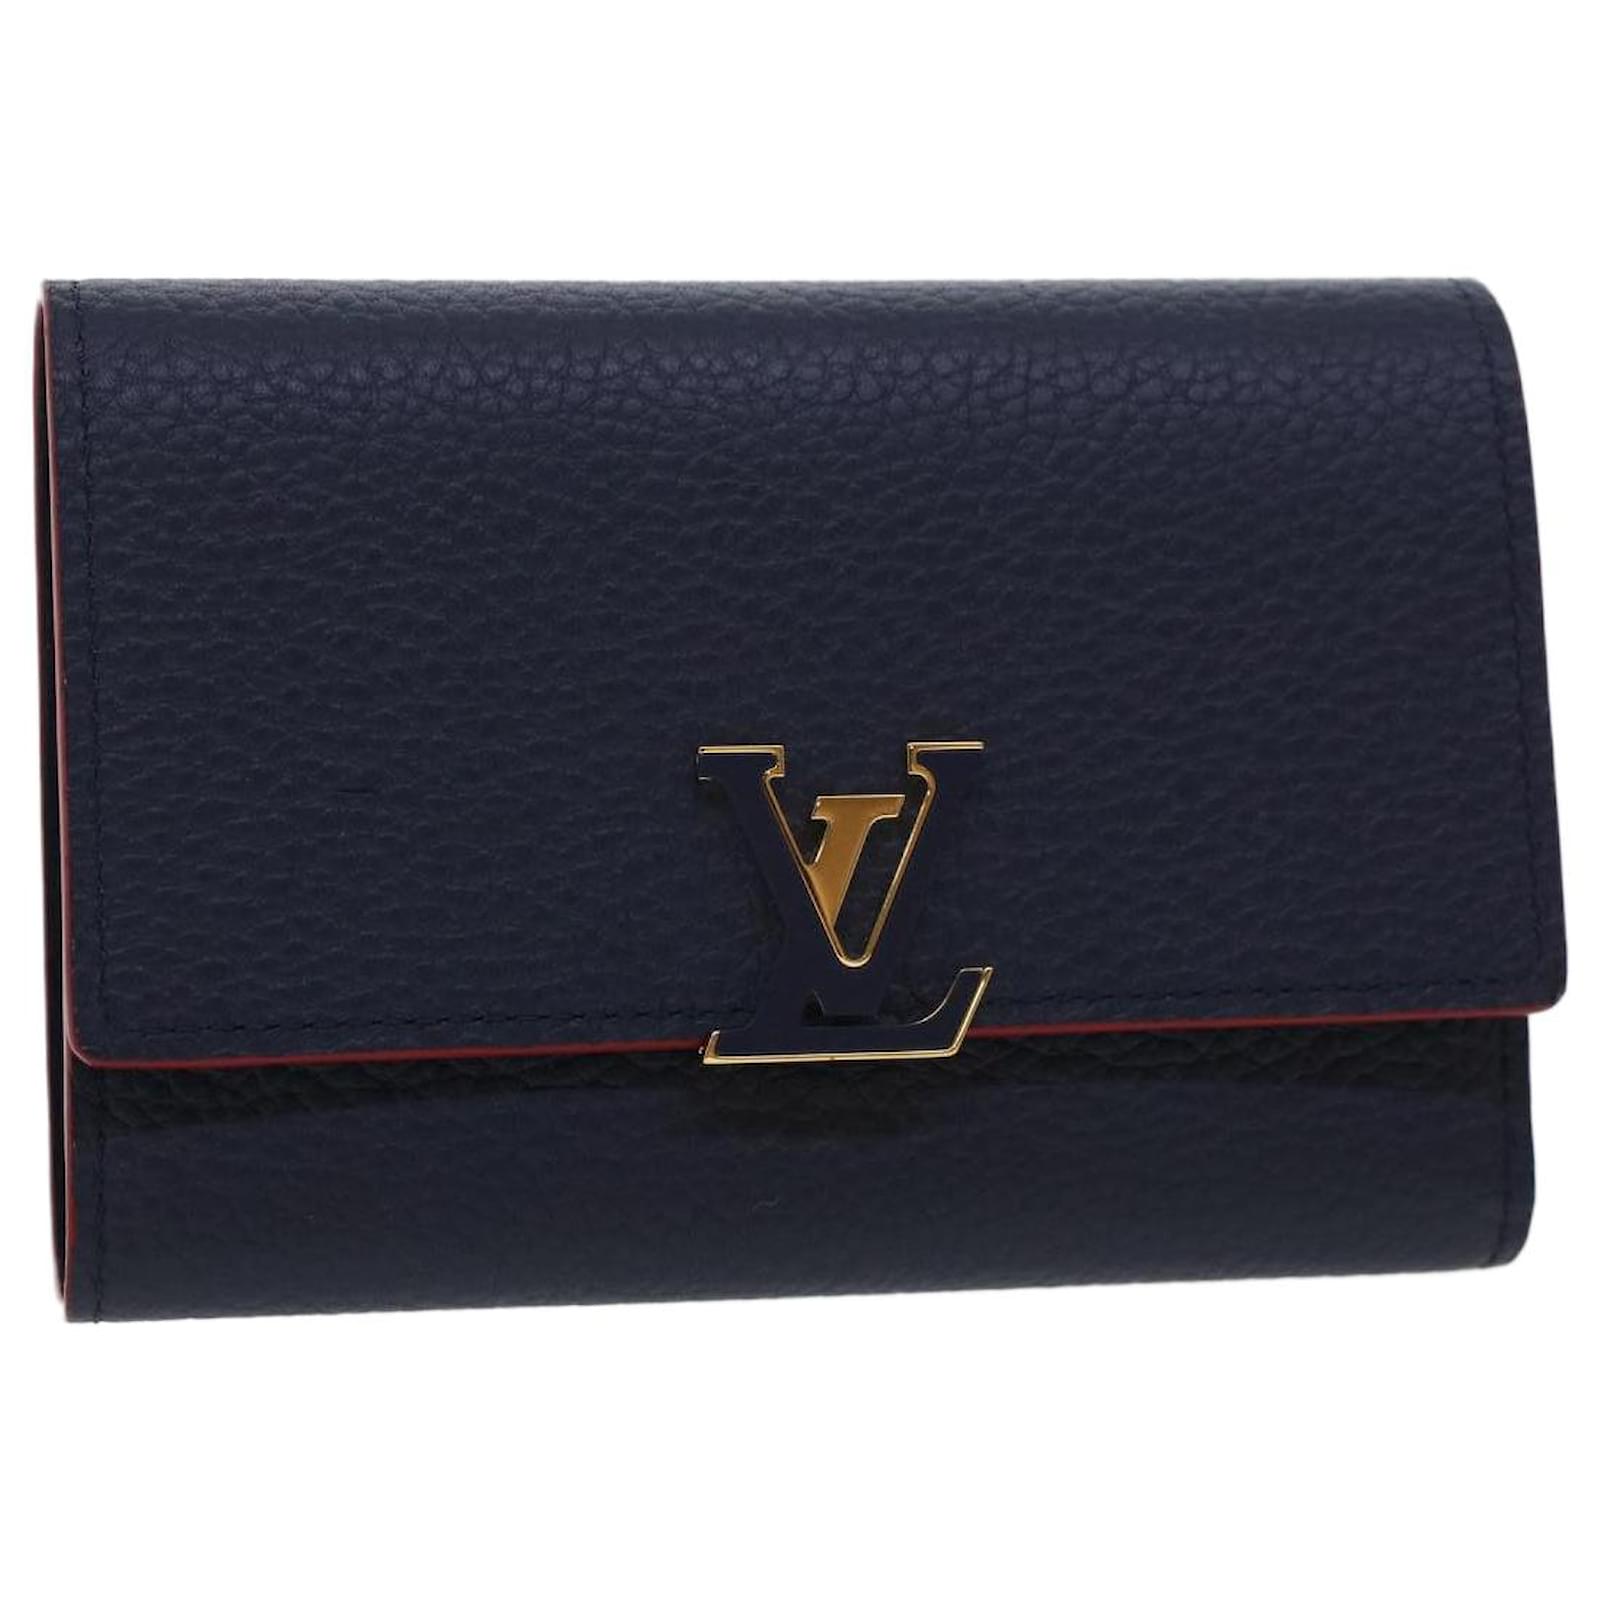 Louis Vuitton Taurillon Leather Capucines Compact Trifold Wallet